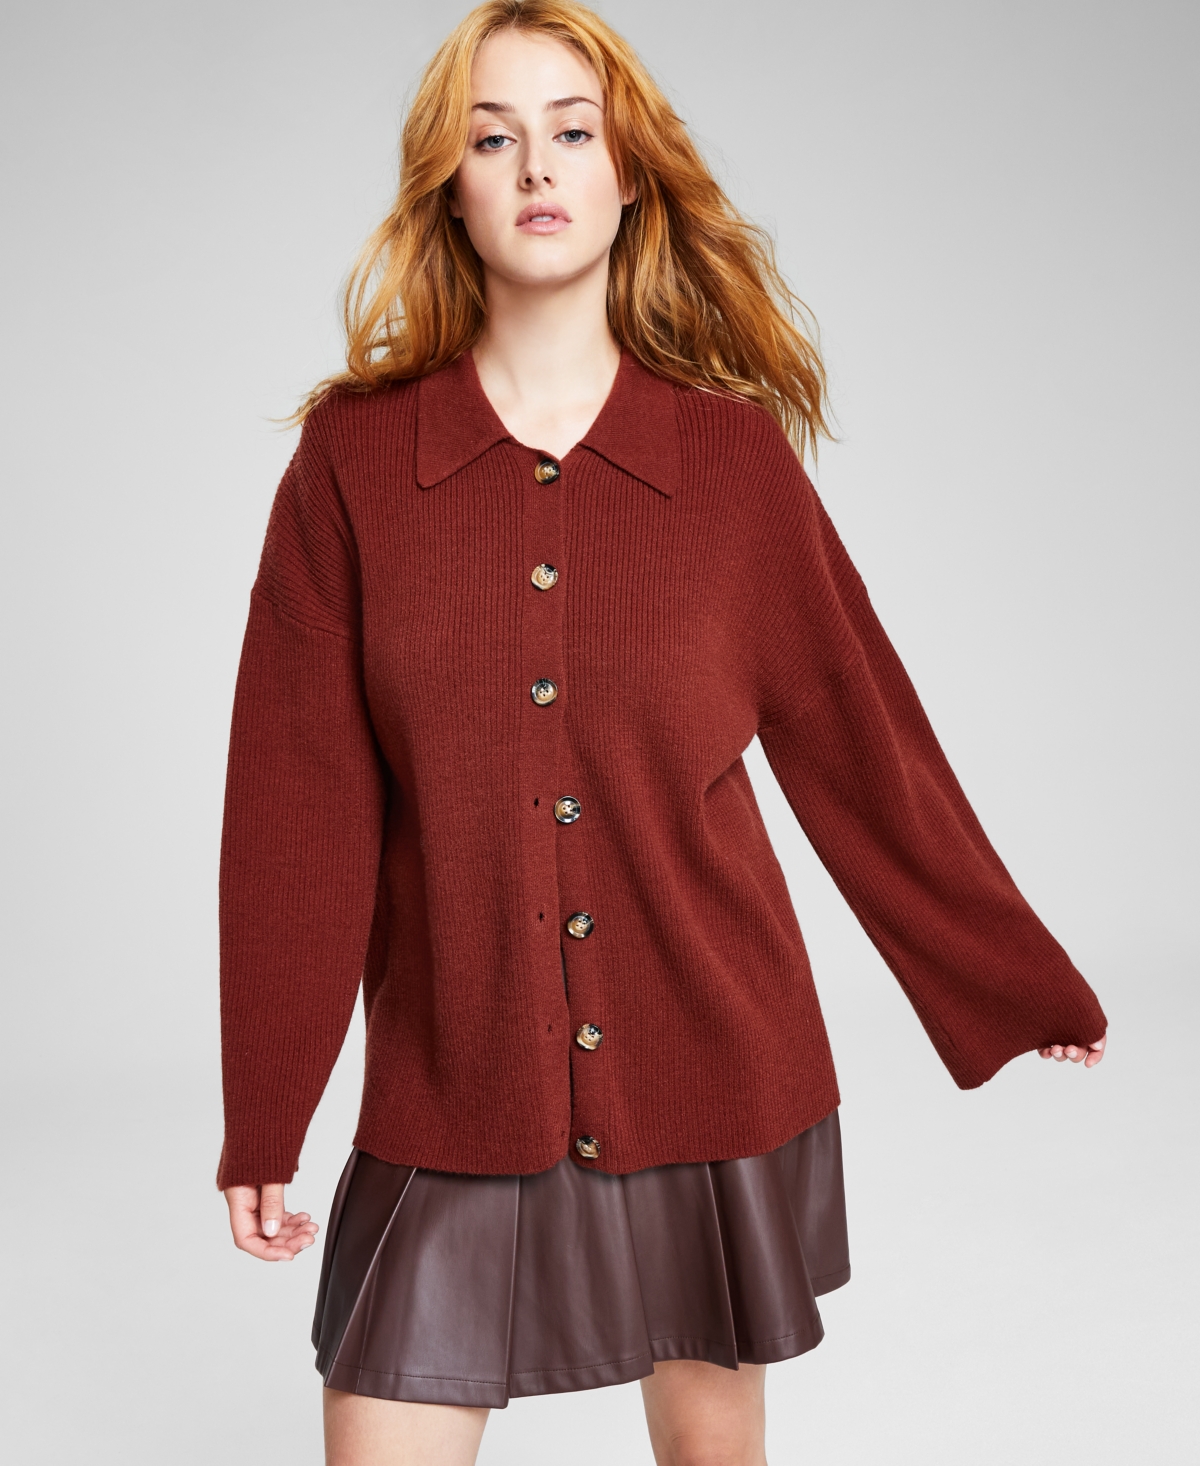 And Now This Women's Collared Cardigan Sweater In Sonoma Brick